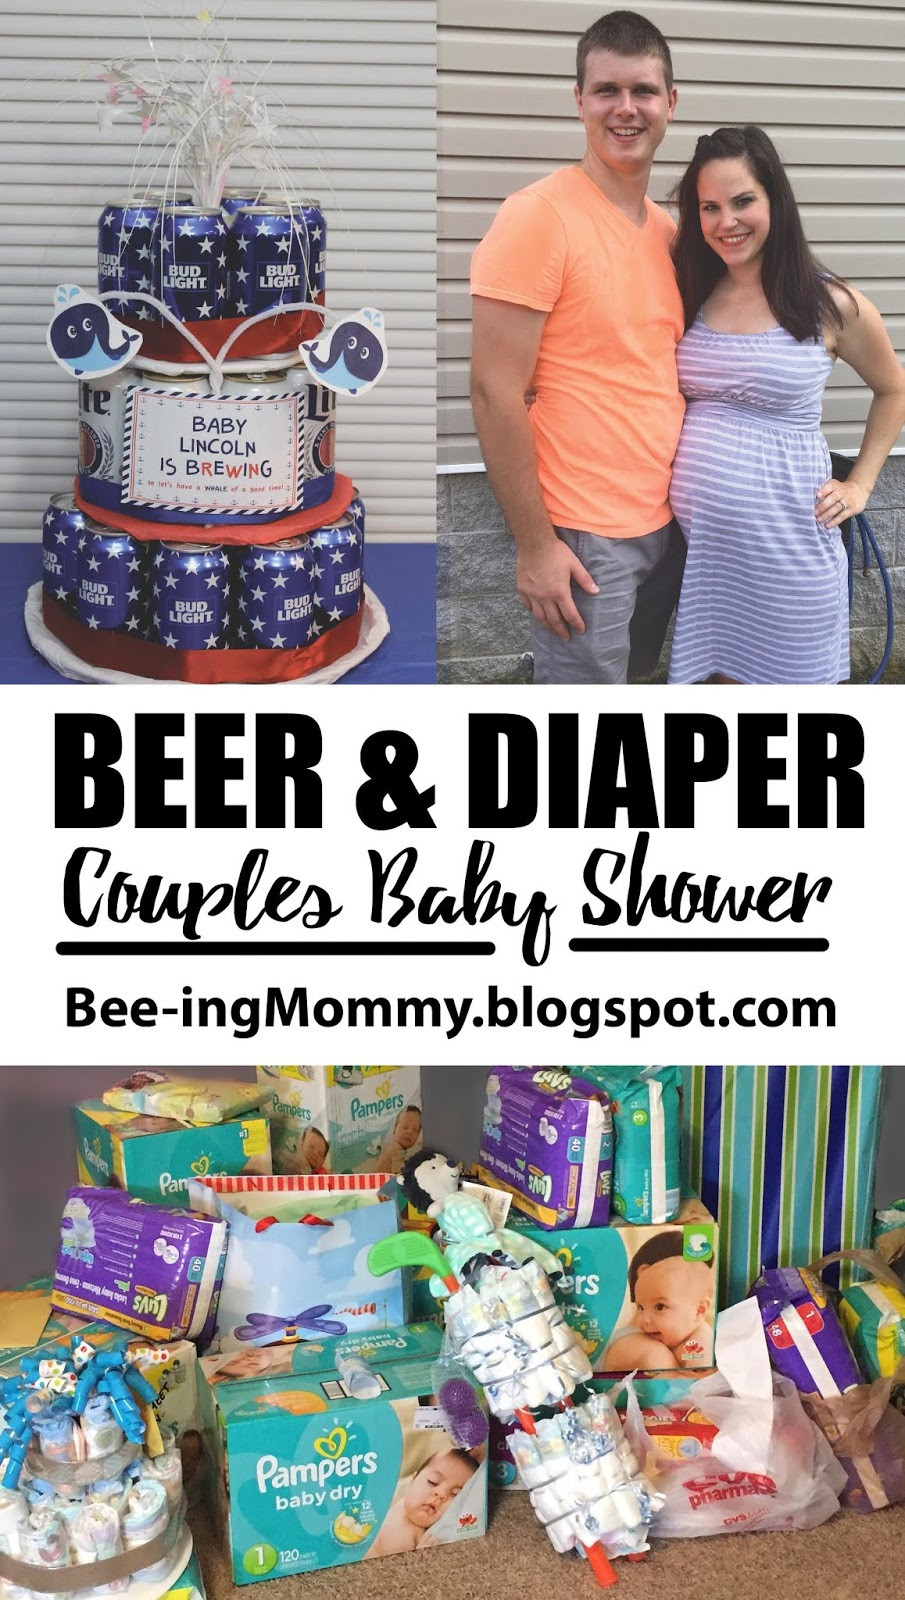 Pamper Party Ideas For Baby Shower
 Couples Baby Shower Diaper & Beer Party